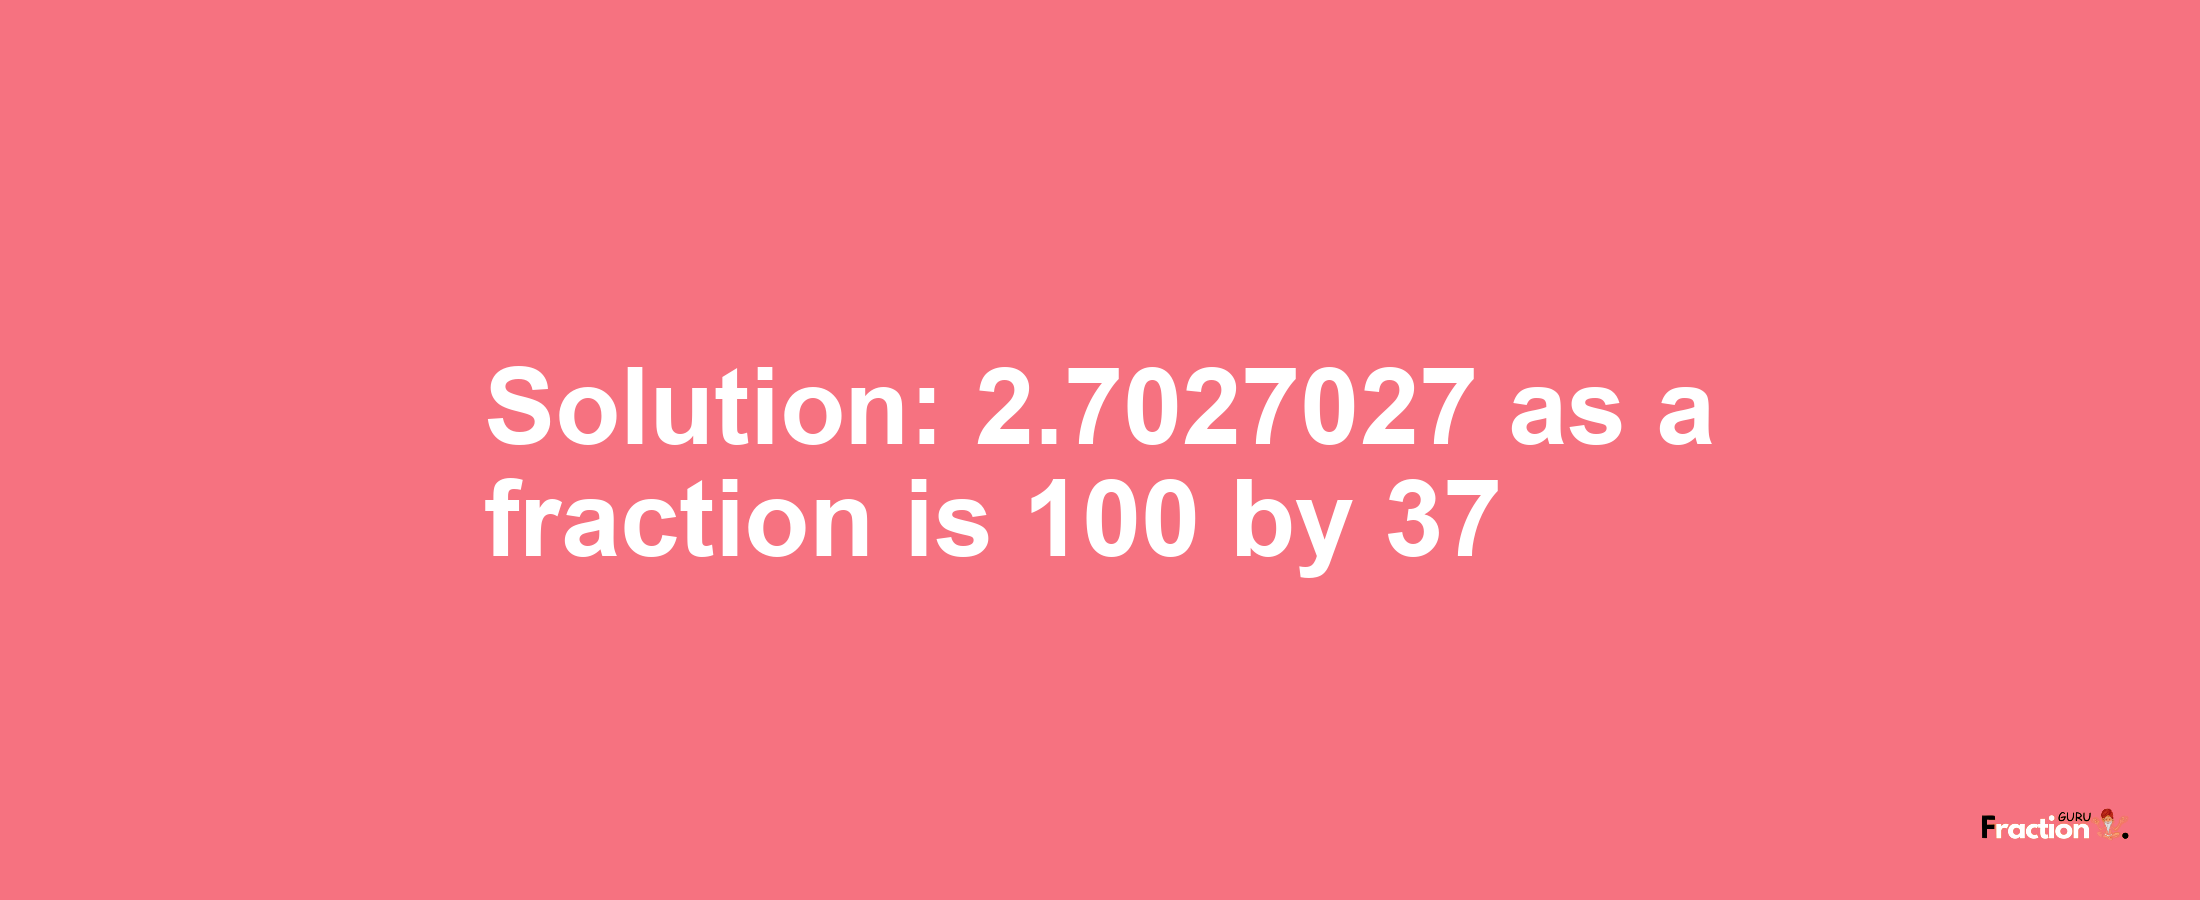 Solution:2.7027027 as a fraction is 100/37